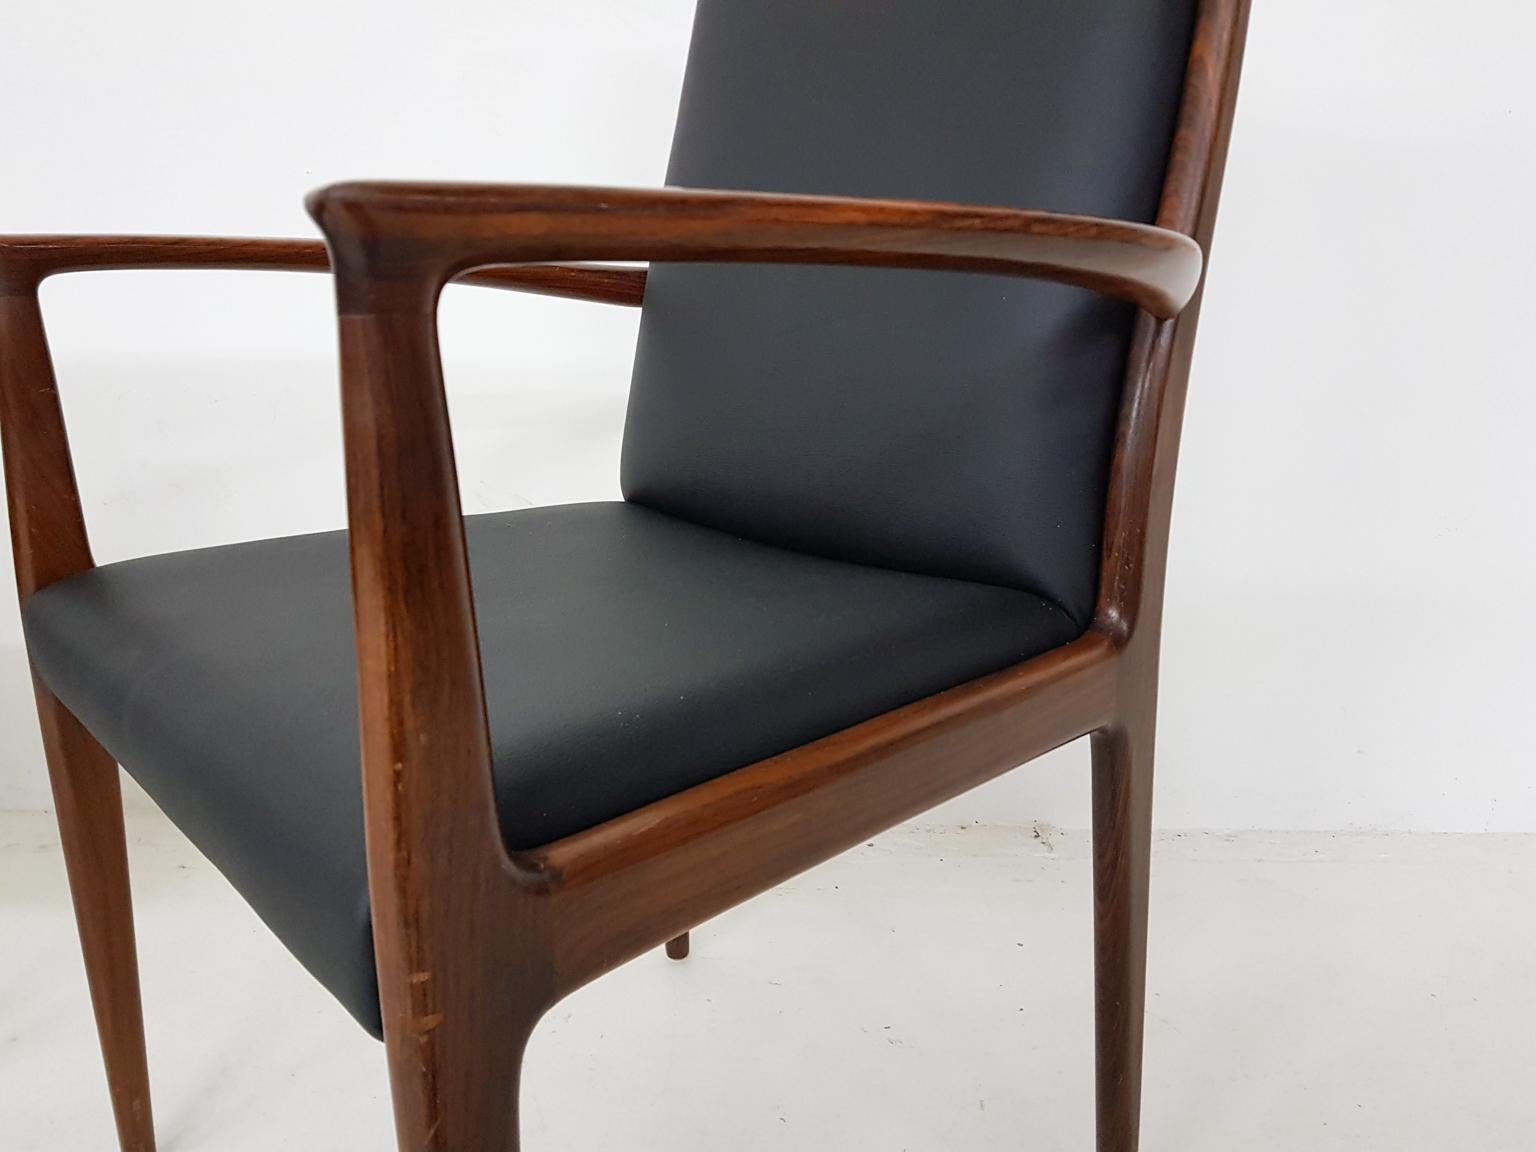 Set of 4 Rosewood and Black Leather Dining Chairs, Danish Modern, 1950s For Sale 2